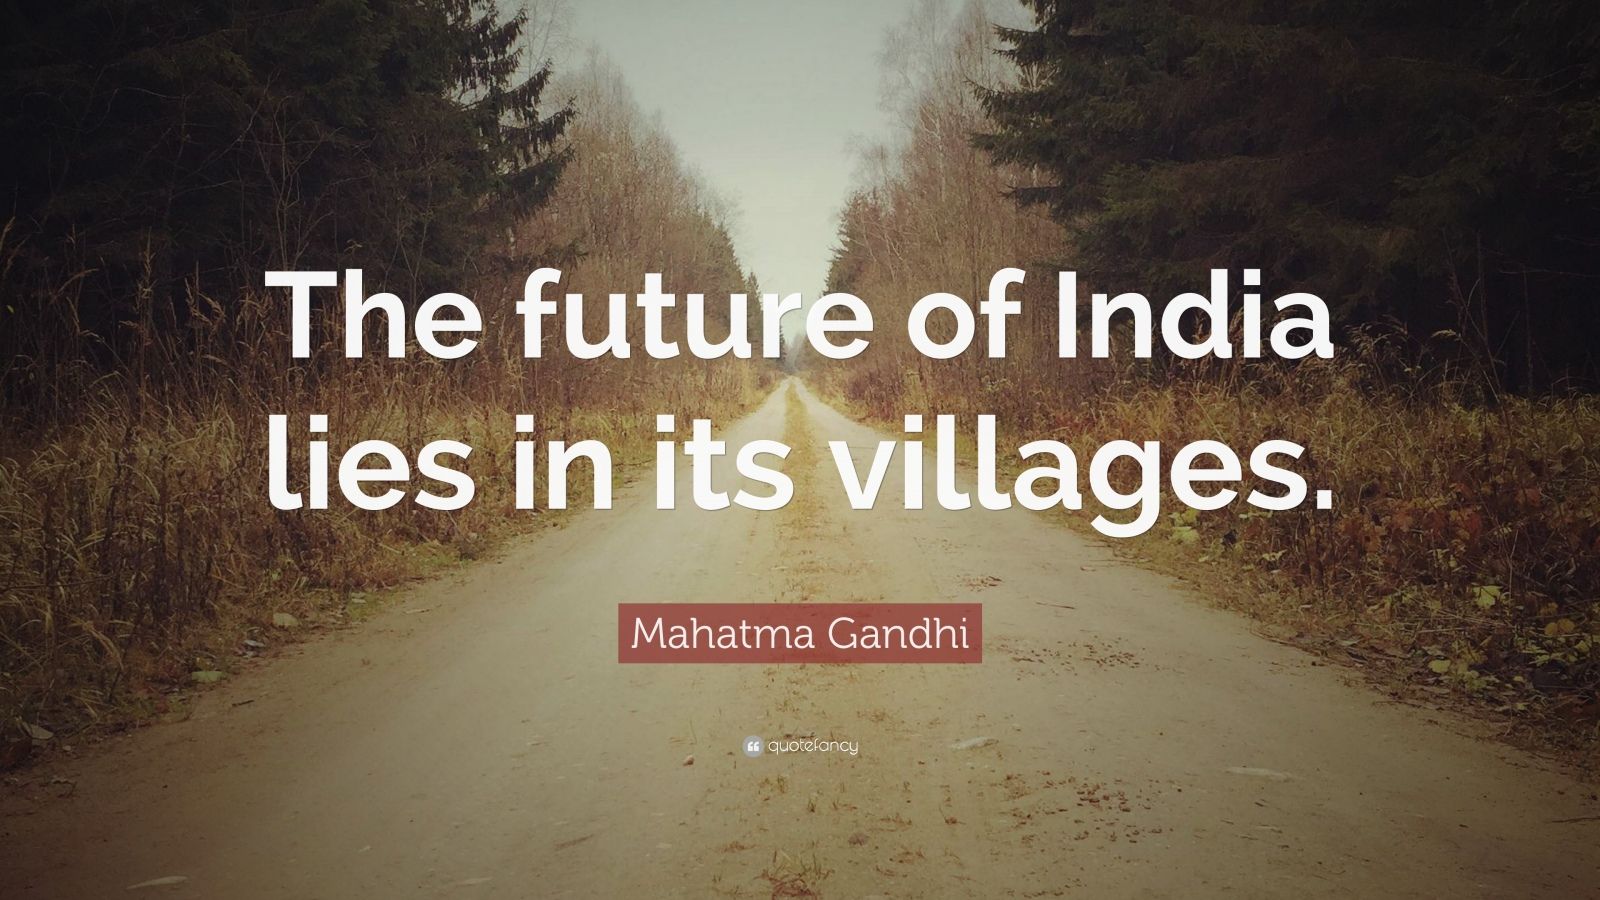 Mahatma Gandhi Quote: “The future of India lies in its villages.” (12